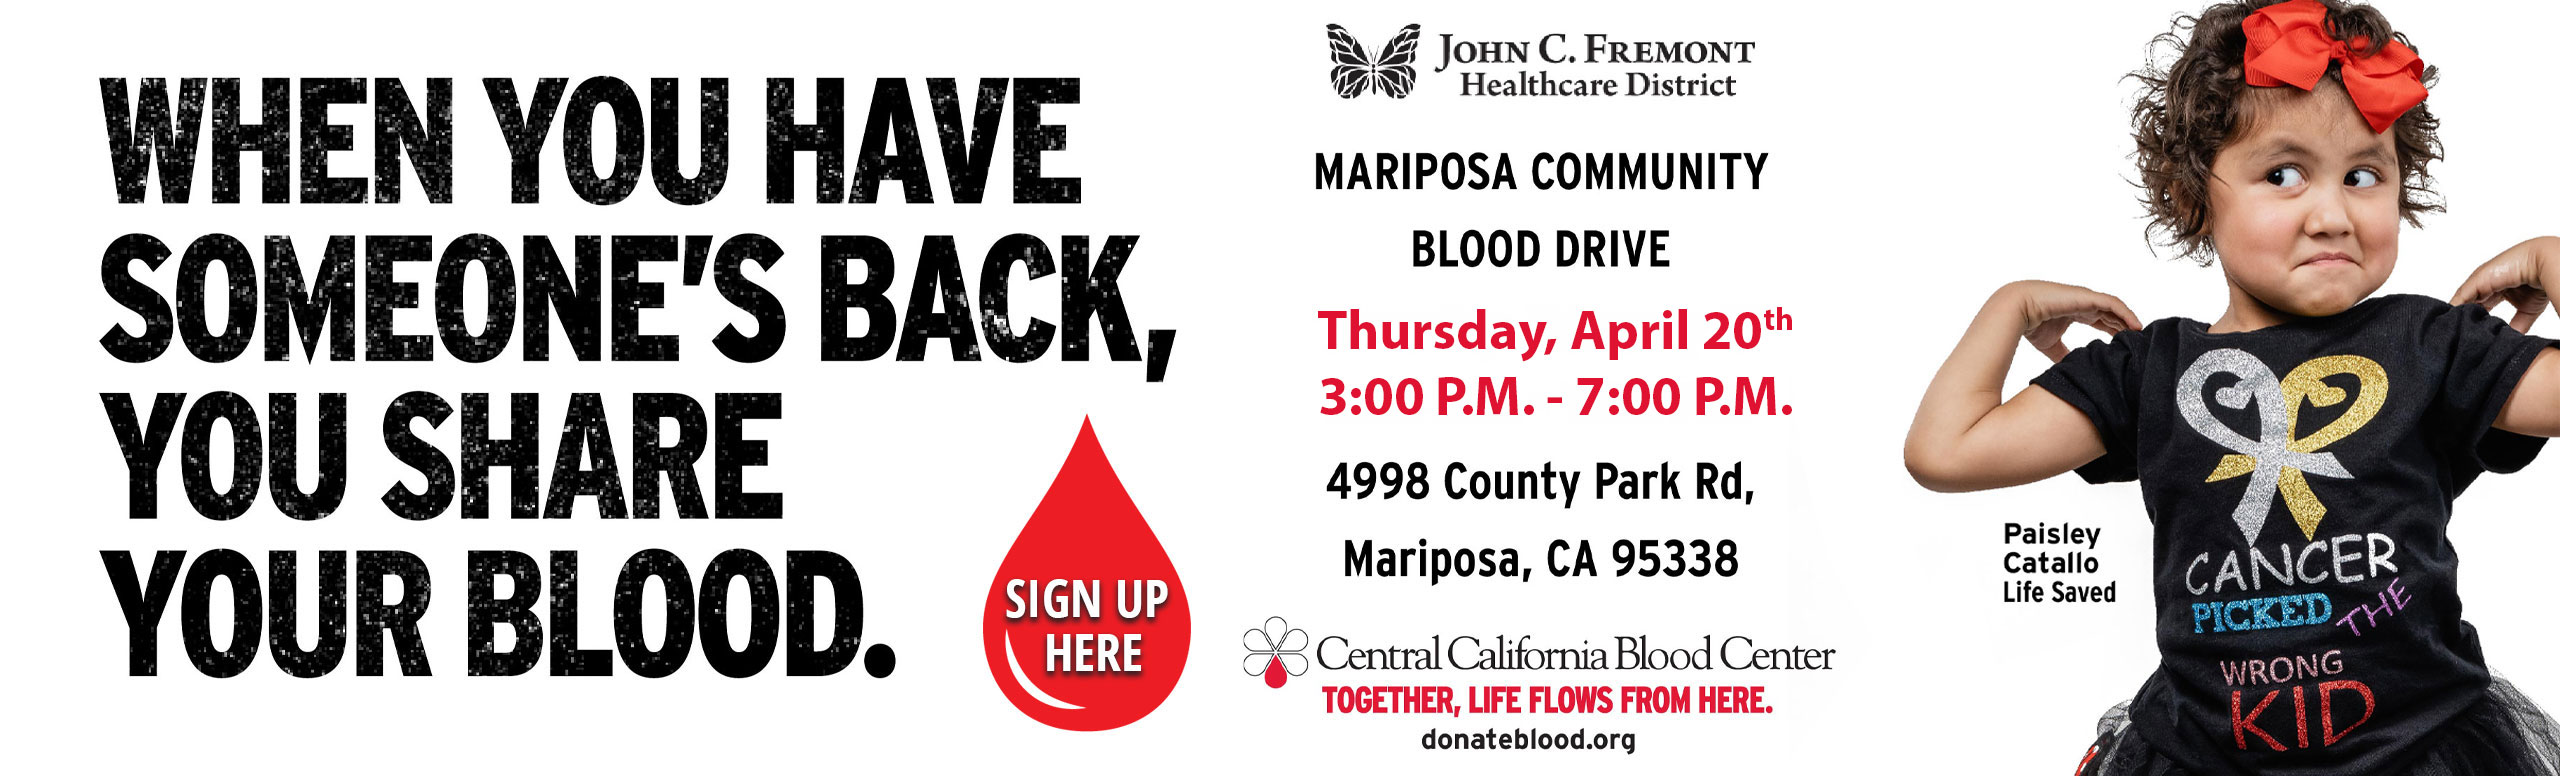 Picturd is a young girl, whose life was saved by donating blood. When you have someone's back, you share your blood. 

Mariposa Community Blood Drive Thursday, February 16 3:00pm - 7:00pm